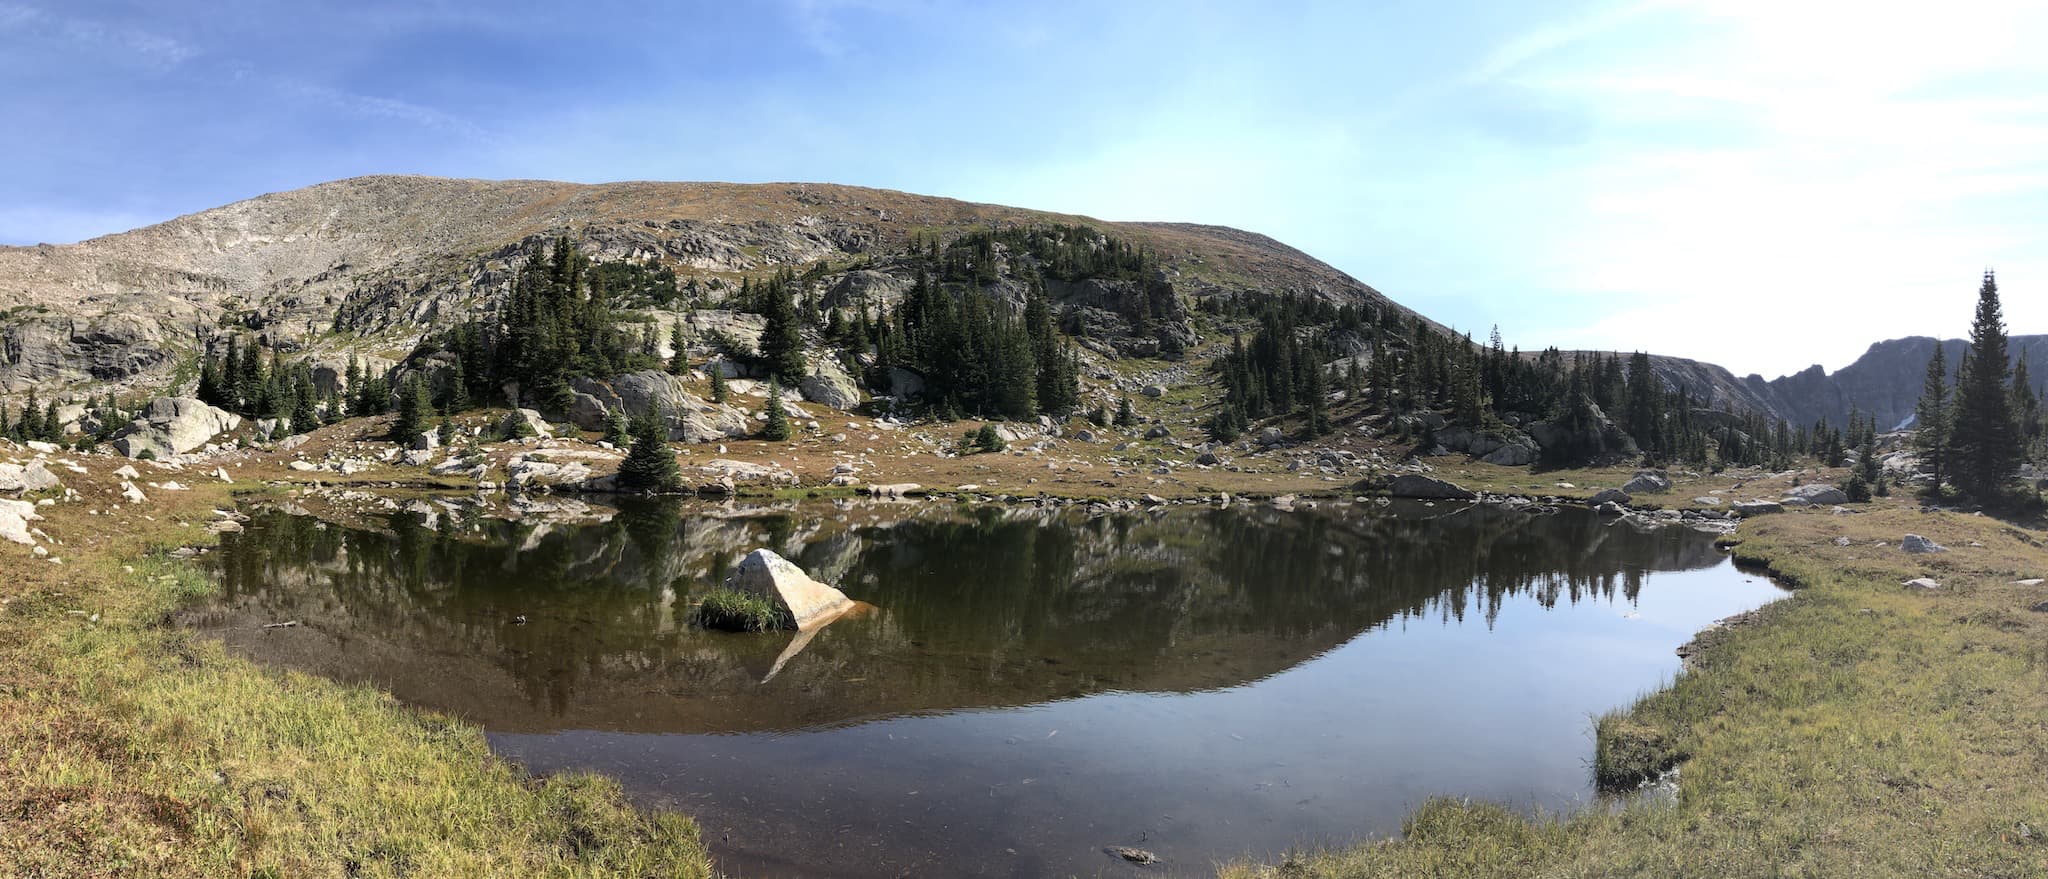 A panoramic view of a small pond with mountains in the background.